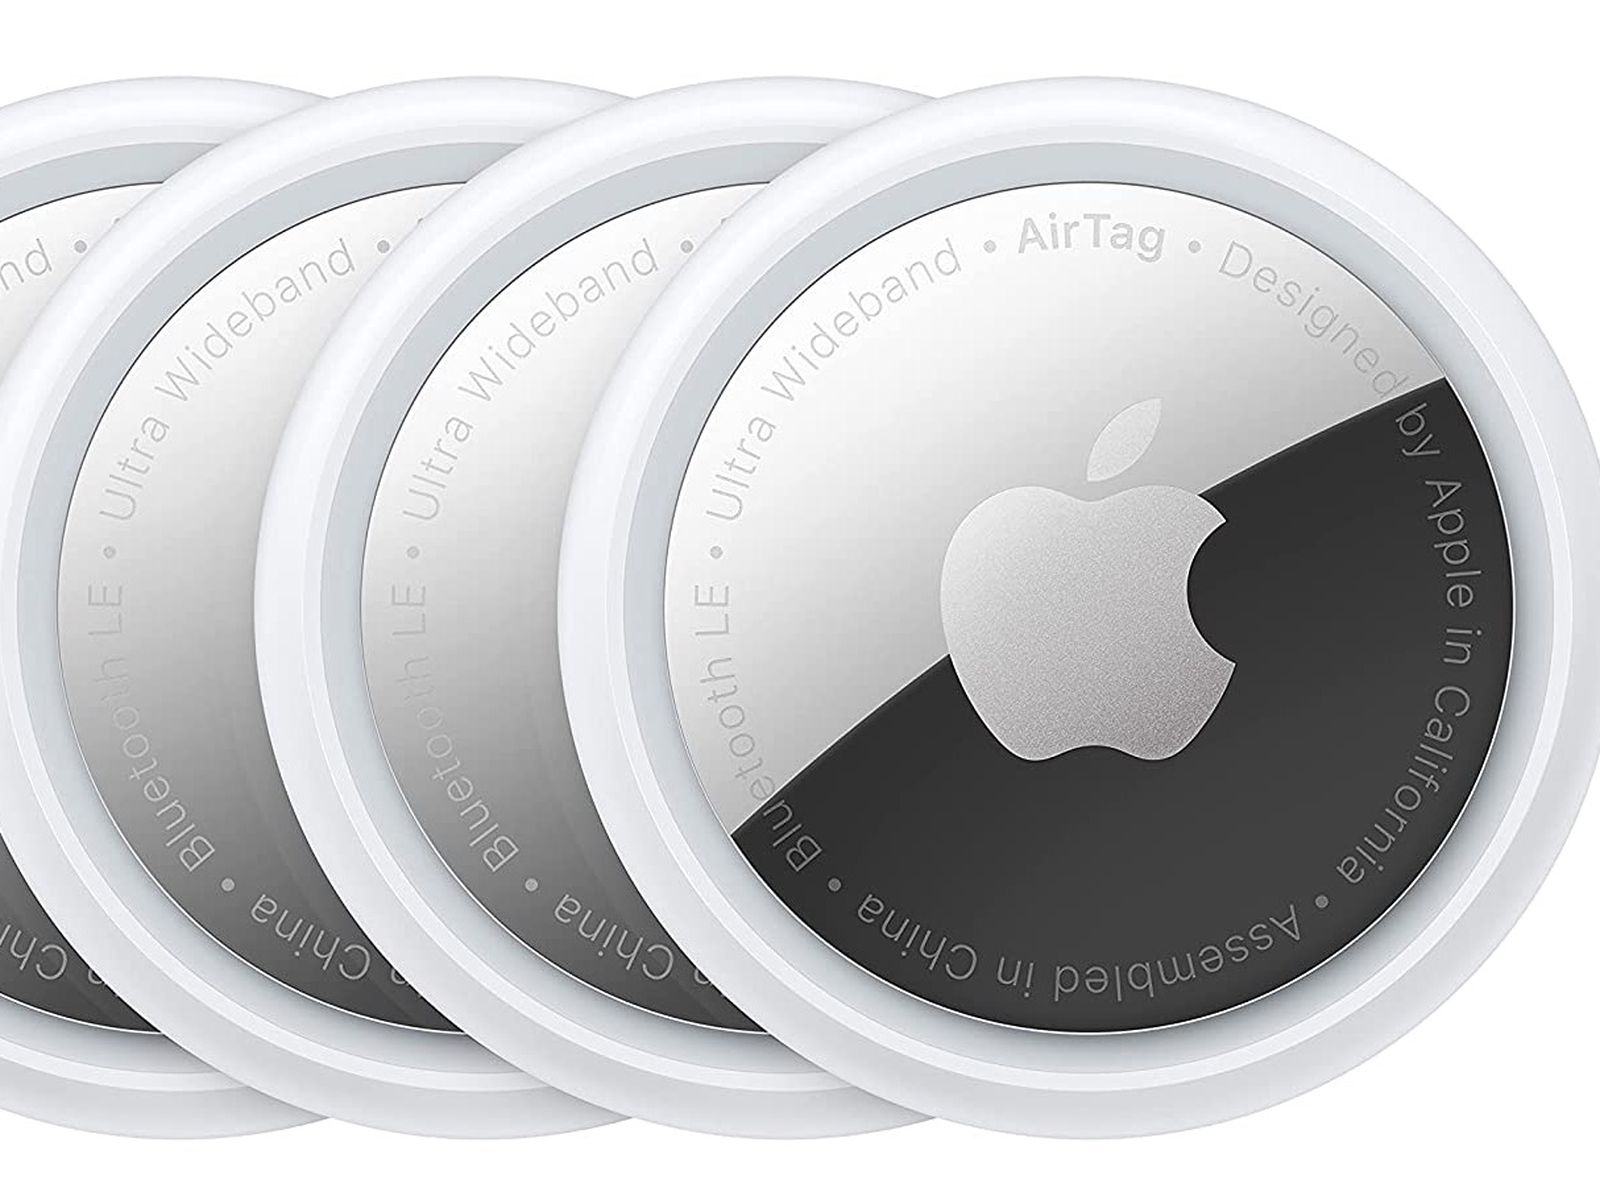 Apple updates AirTag to fix its biggest flaws